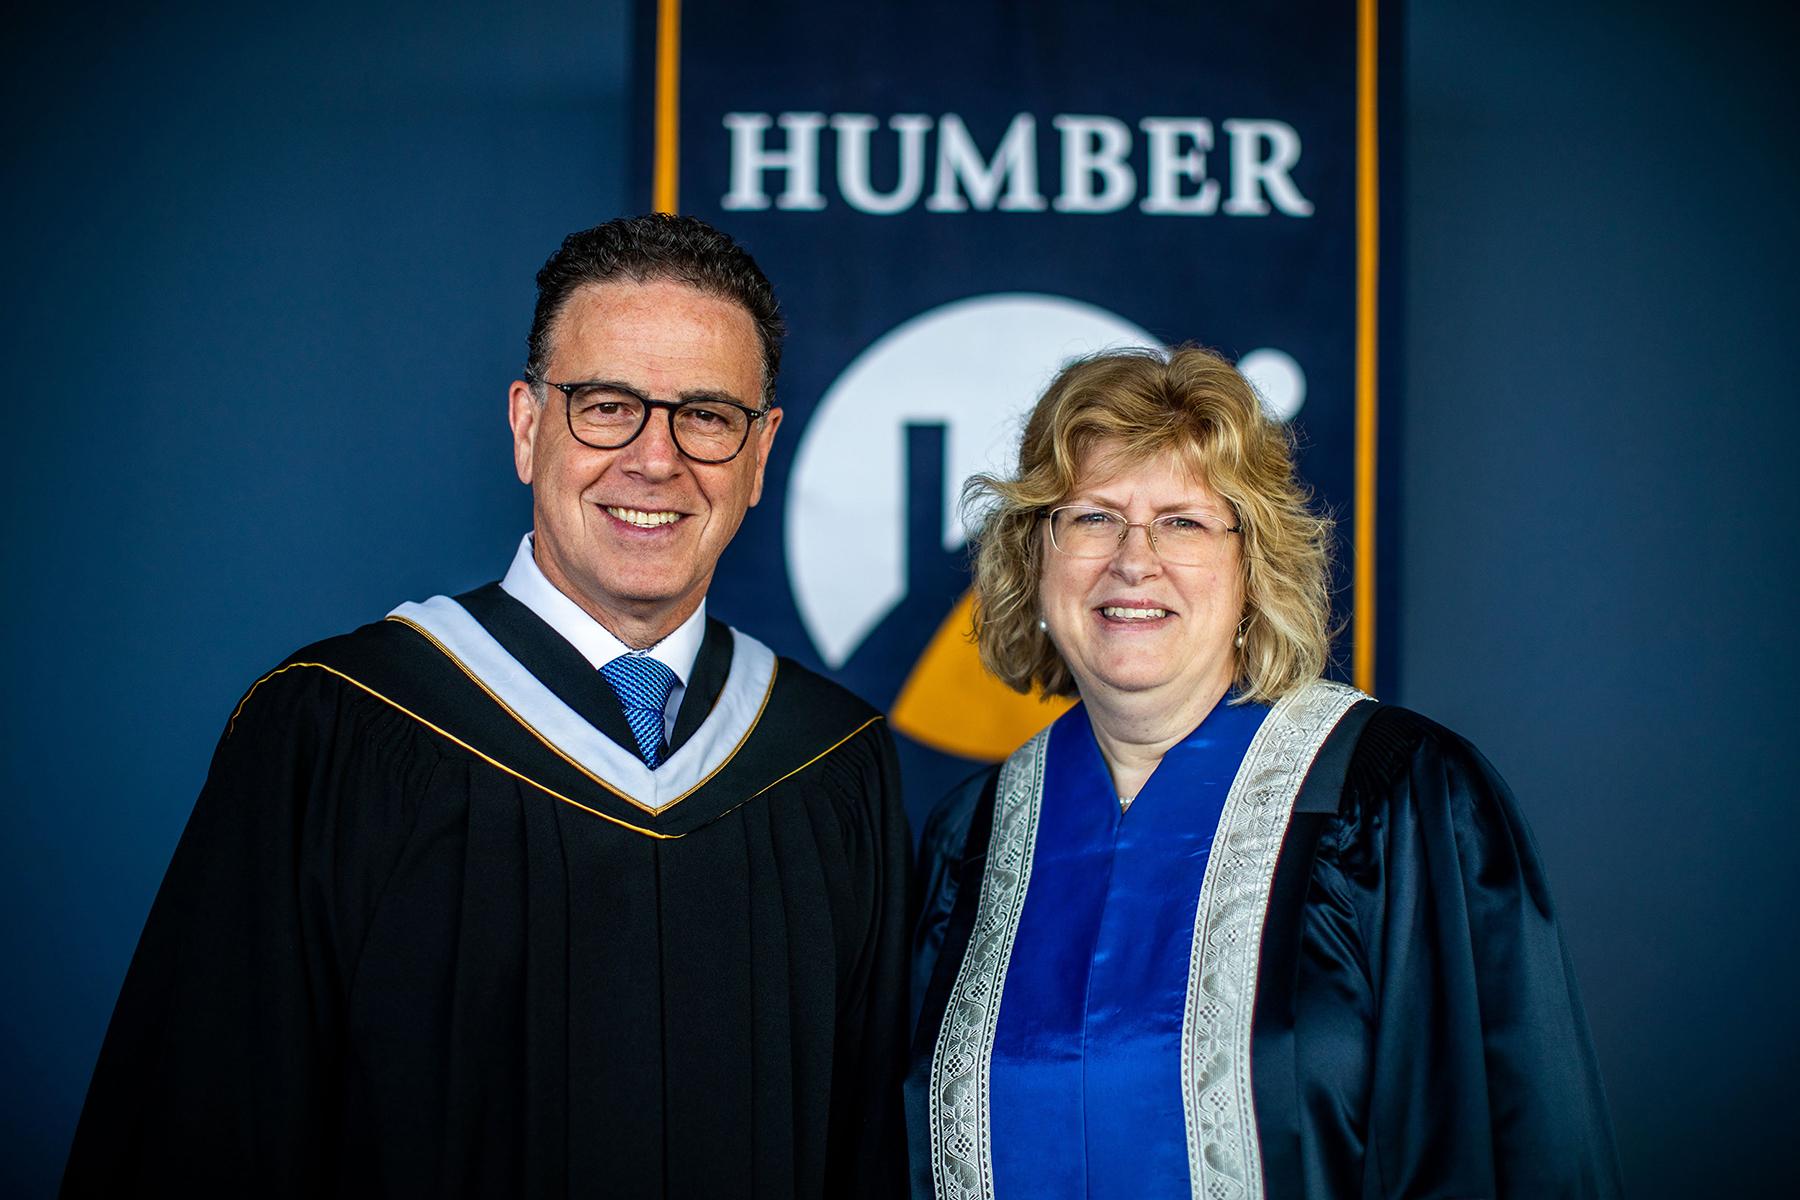 Two people wearing graduation robes smile and pose for a photo in front of a banner that reads Humber.